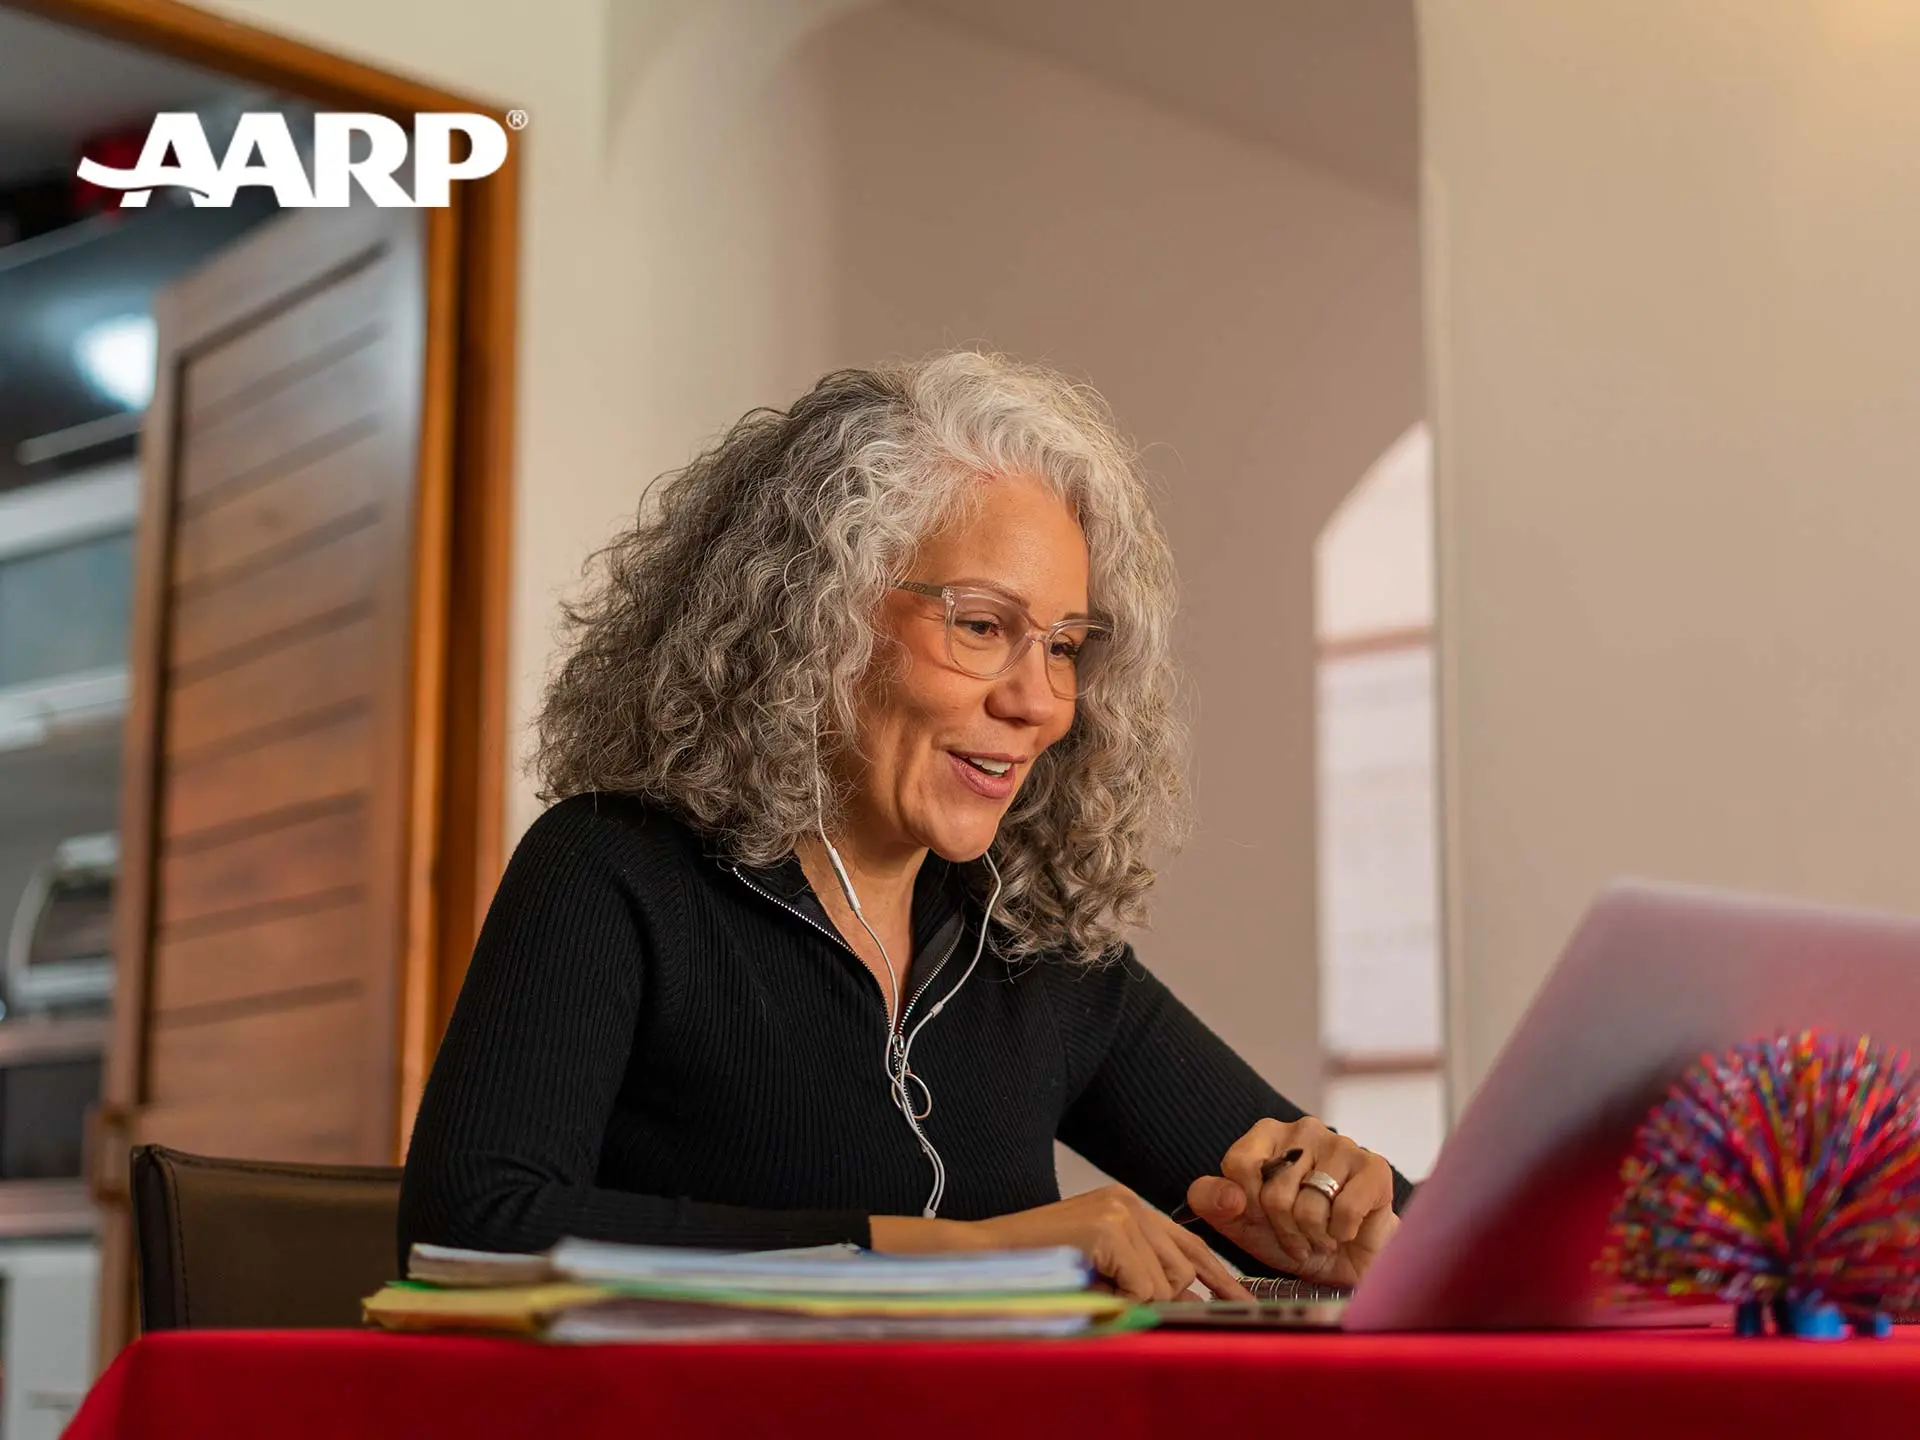 AARP | Get People Thinking About Staying Sharp